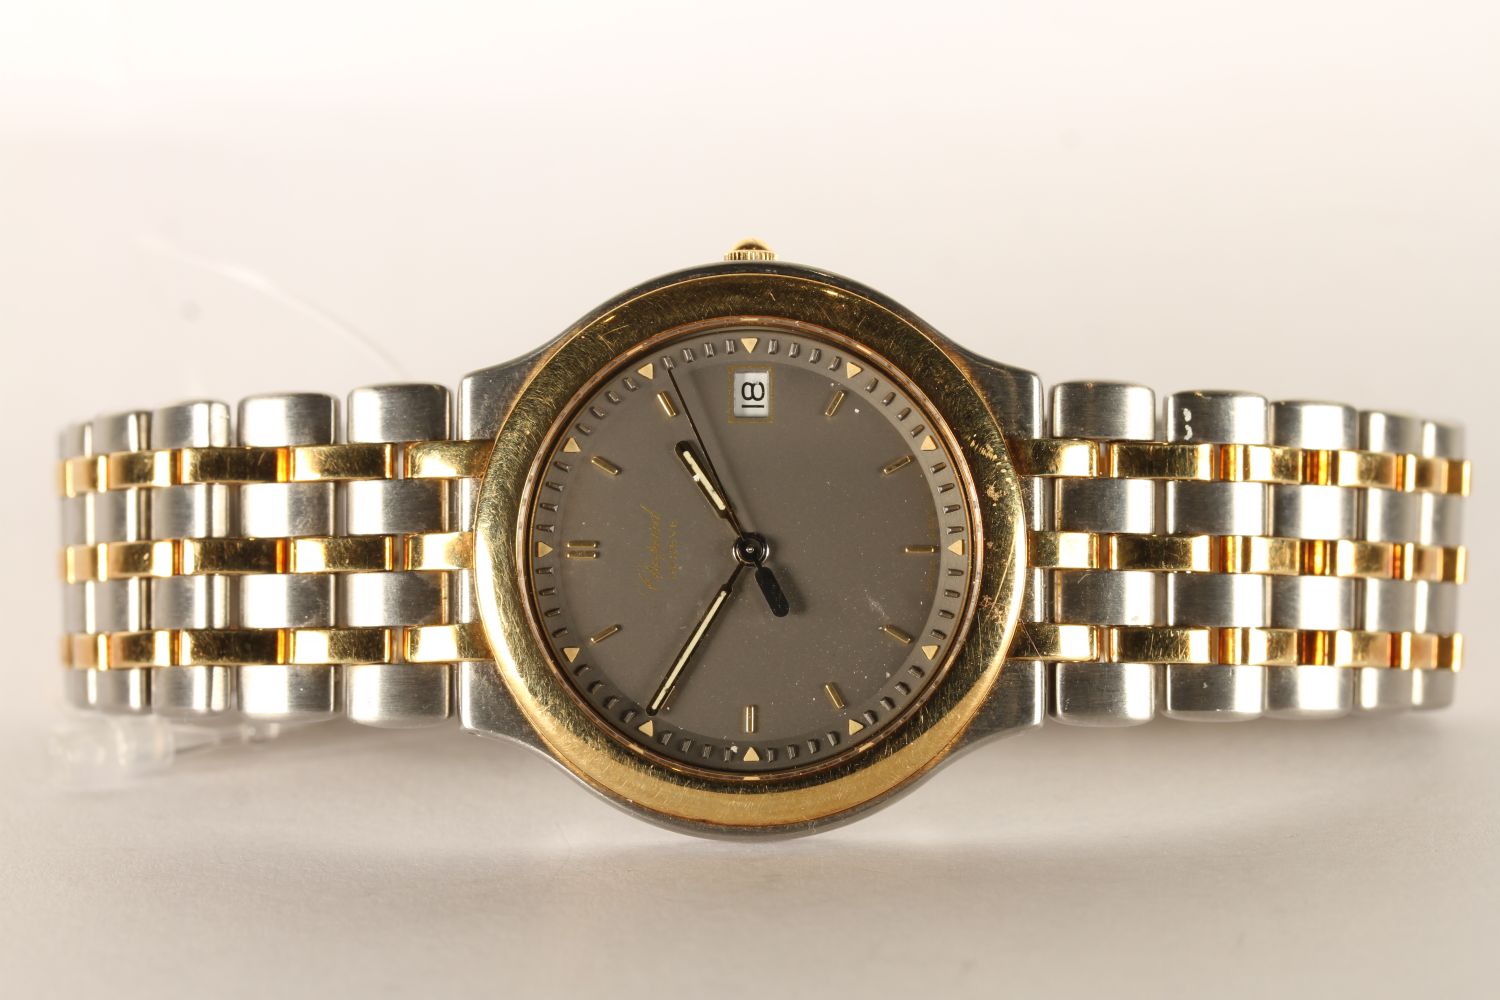 UNISEX CHOPARD BI COLOUR MONTE CARLO WRISTWATCH, circular grey dial with gold baton hour markers and - Image 2 of 5